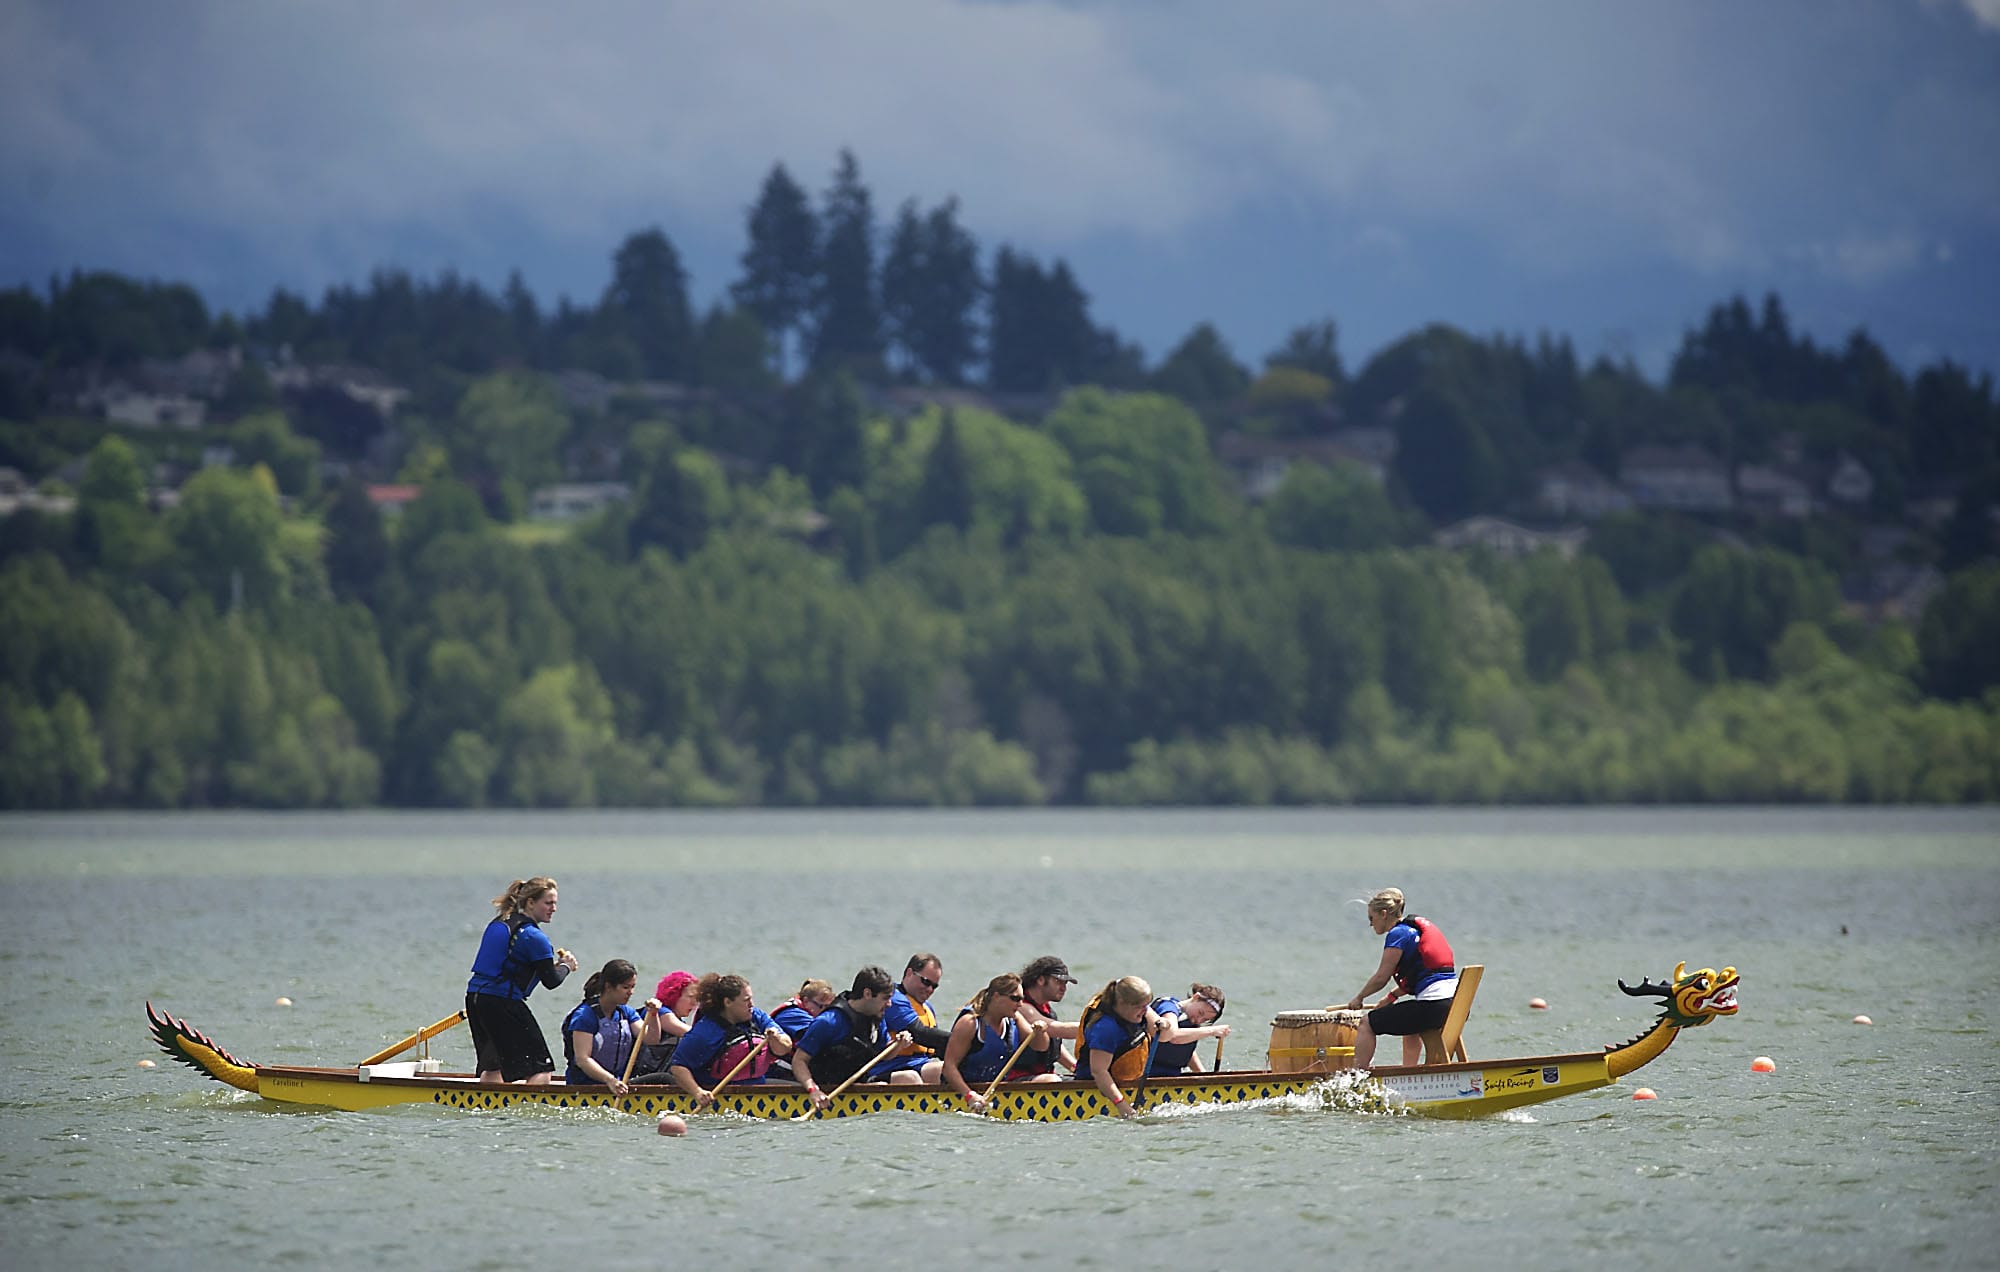 Team Fusion competes in dragon boat races to benefit Paddle for Life at Vancouver Lake.